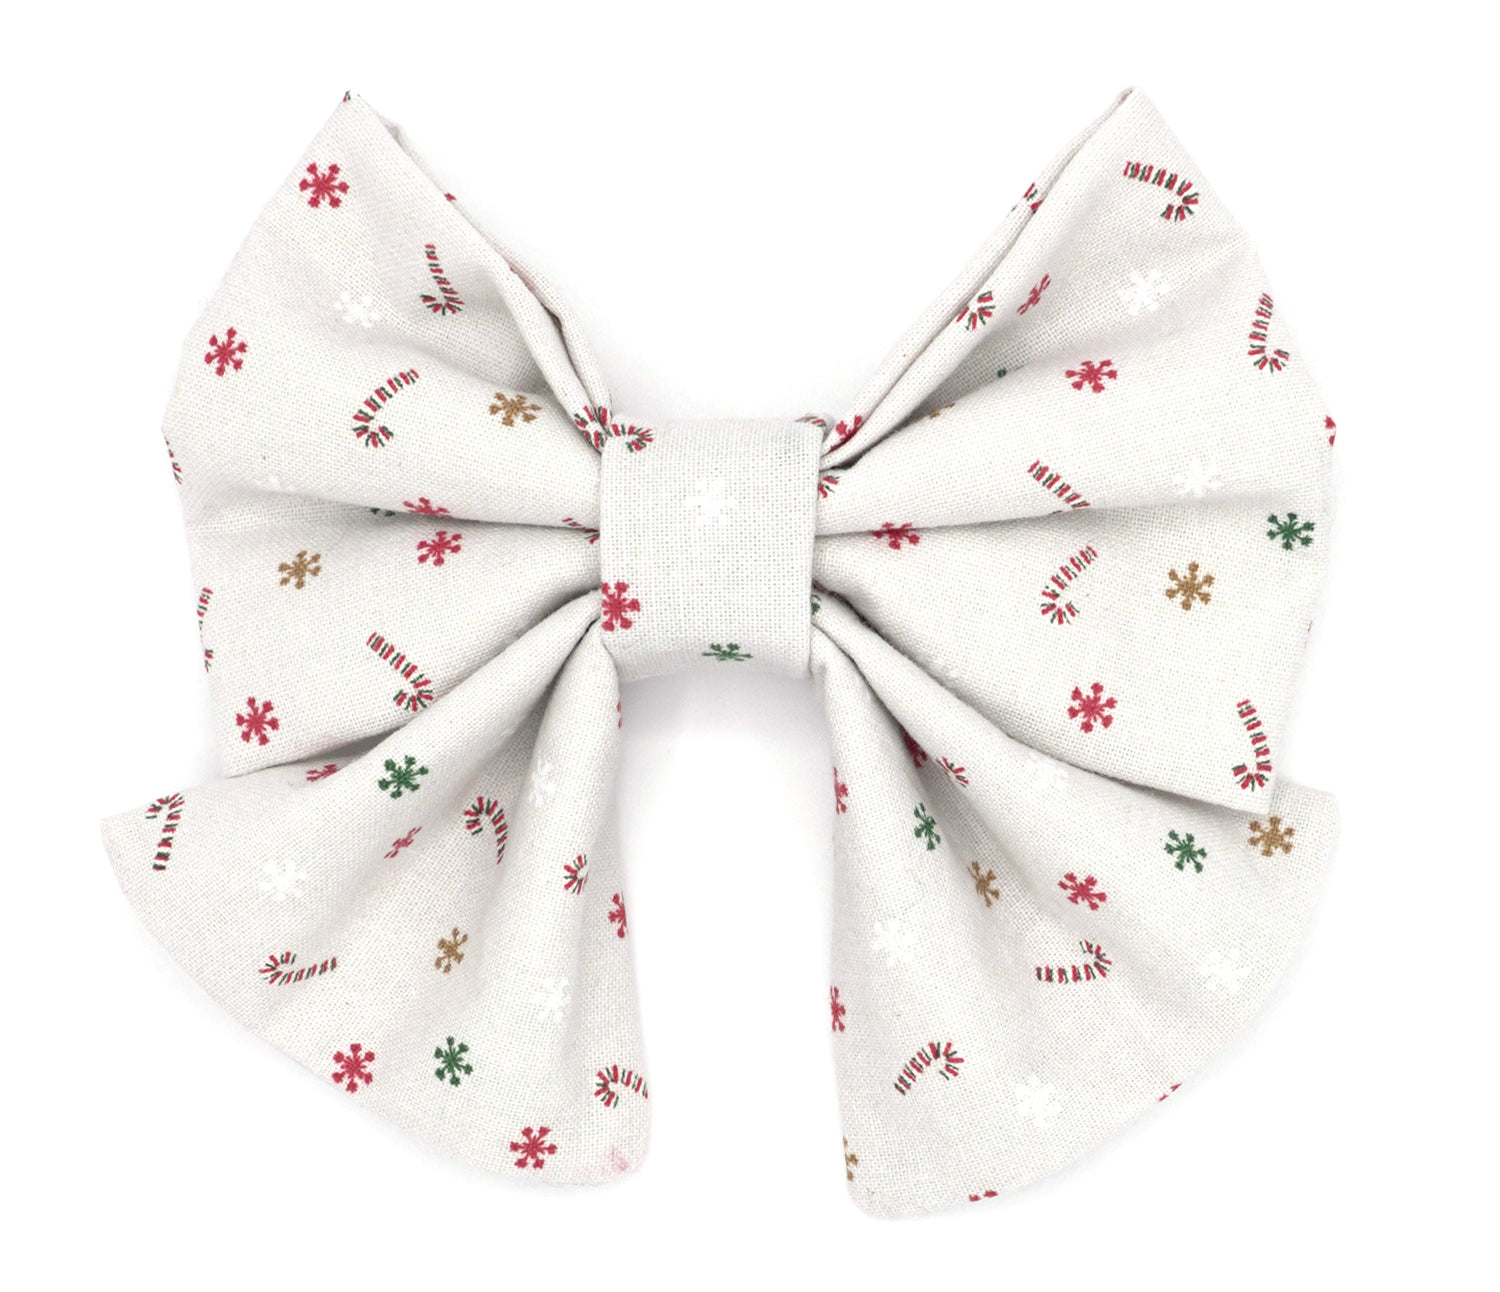 Handmade cotton bow tie with tails for dogs (or other pets). Elastic straps on back with snaps make it easy to add to collar, harness, or leash. Light grey (almost white) background with red/white candy canes, and red, green, gold and white snowflakes.